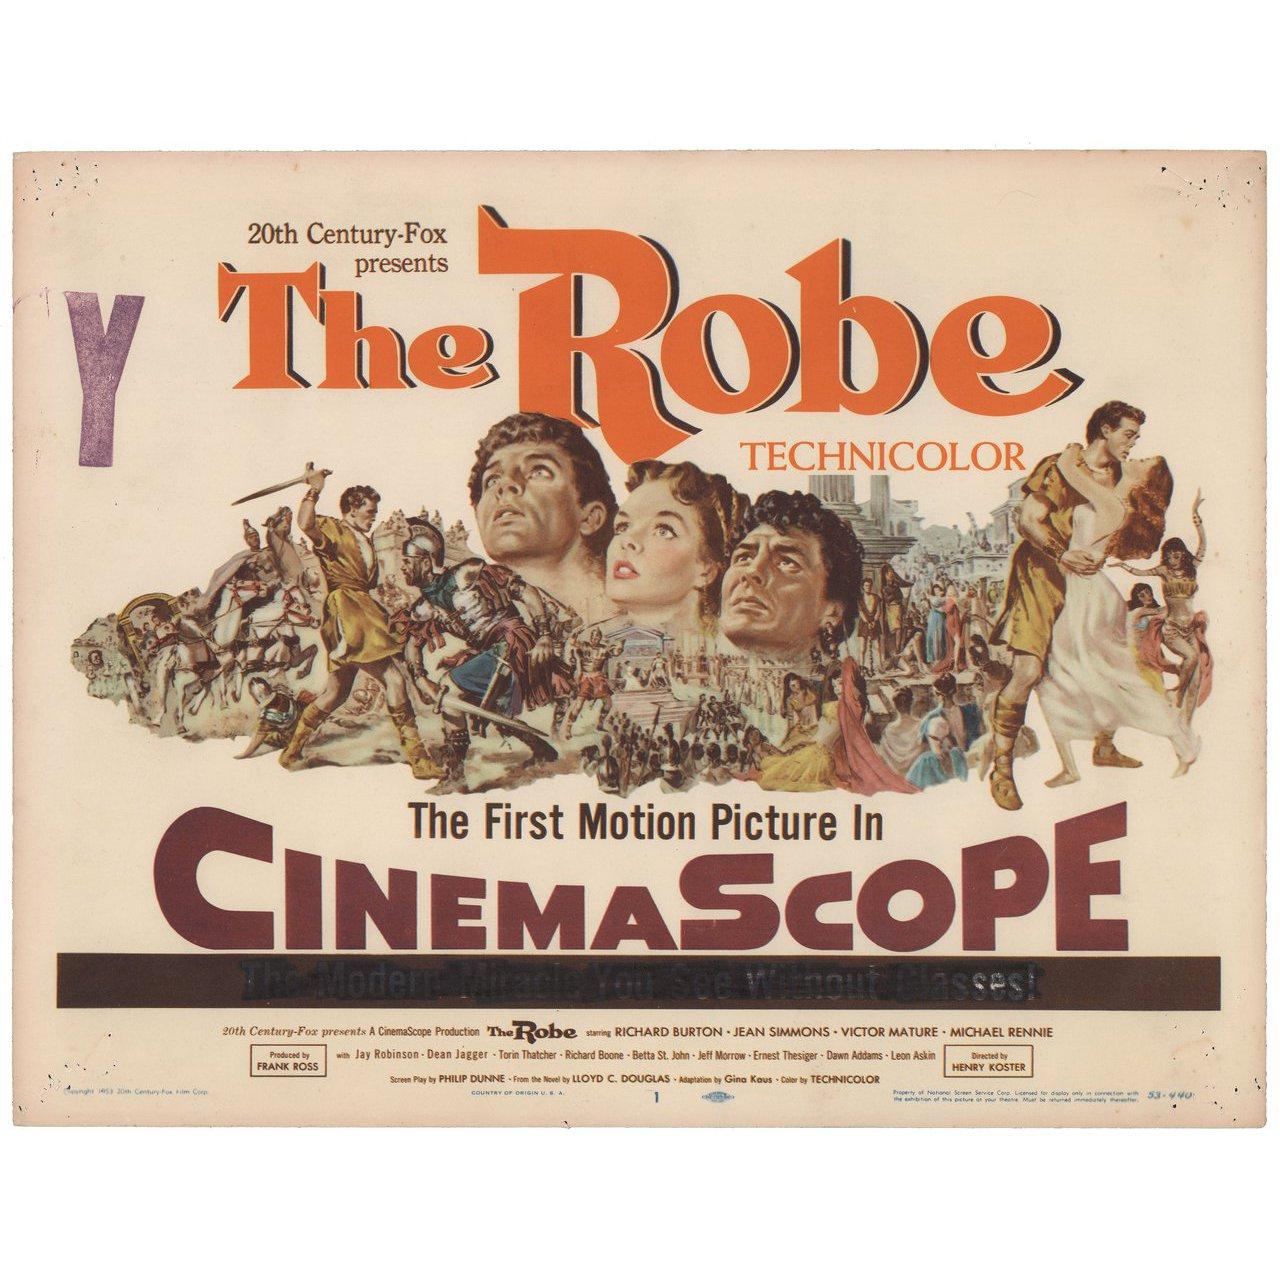 Original 1953 U.S. title card for the film The Robe directed by Henry Koster with Richard Burton / Jean Simmons / Victor Mature / Michael Rennie. Very good condition, pinholes and censor stamp. Please note: the size is stated in inches and the